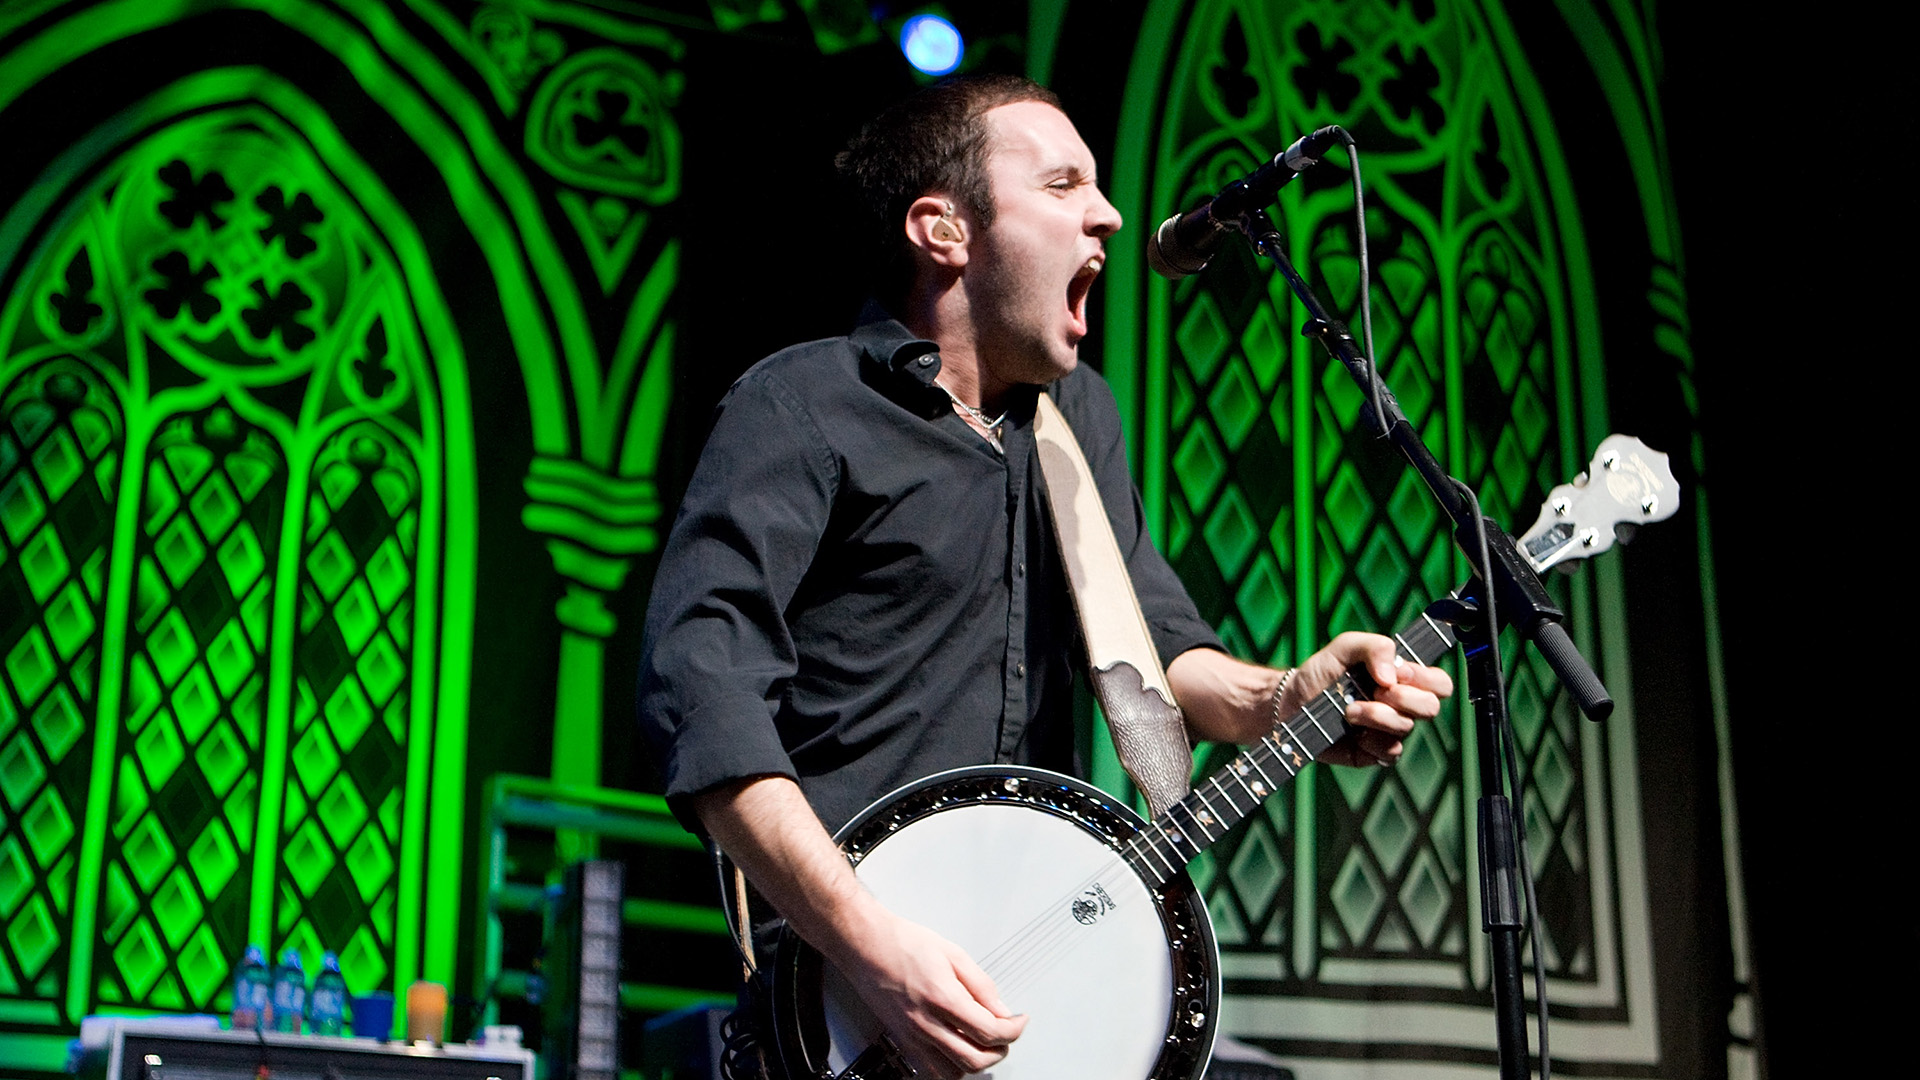 Jeff Darosa of Dropkick Murphys performs in the Egyptian Room at the Murat Theatre on March 4, 2009 in Indianapolis, Indiana.